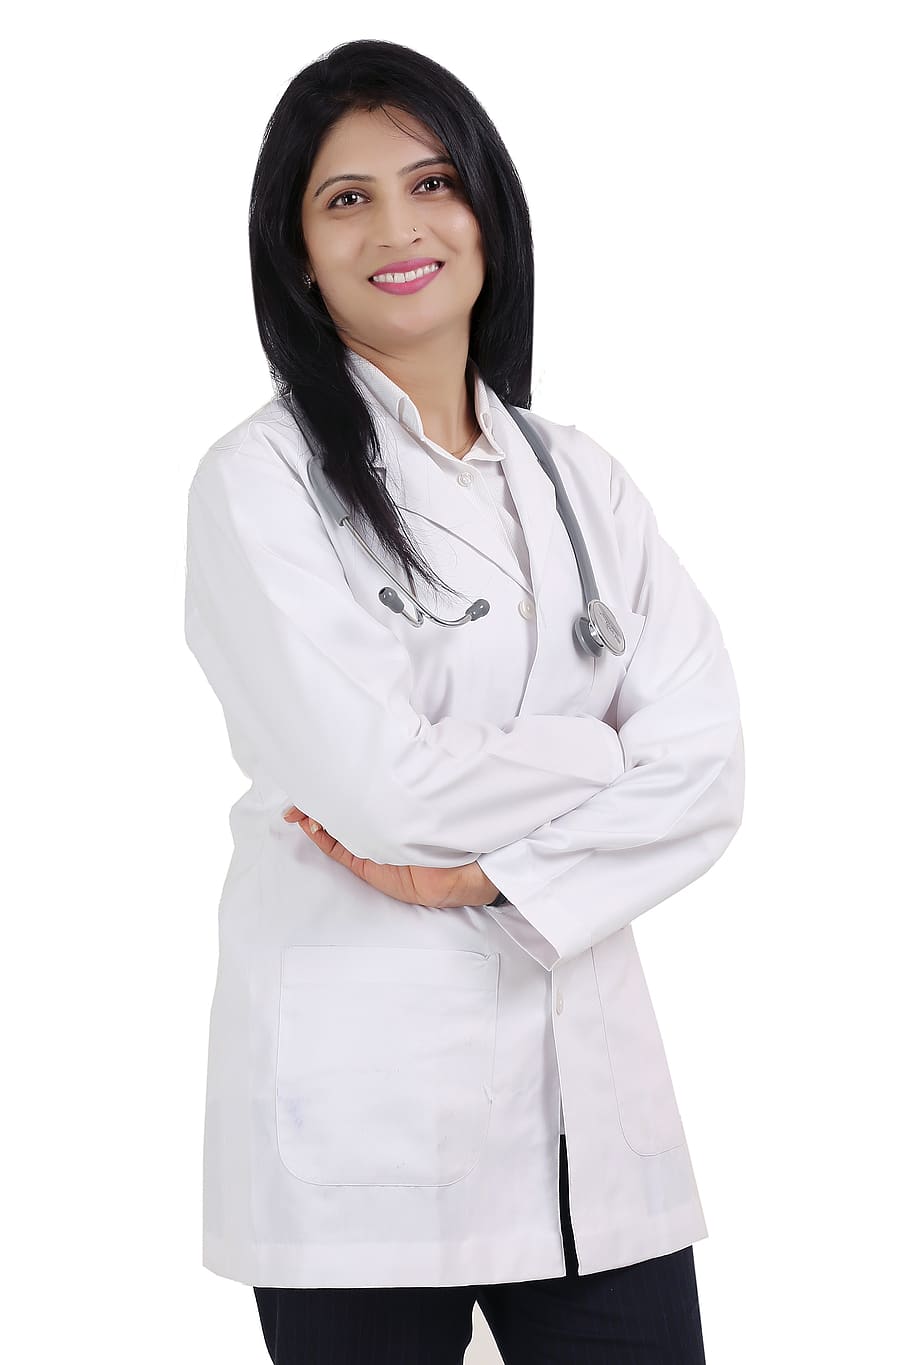 doctor, medical, hospital, health, healthcare, medicine, stethoscope, healthy, white background, looking at camera